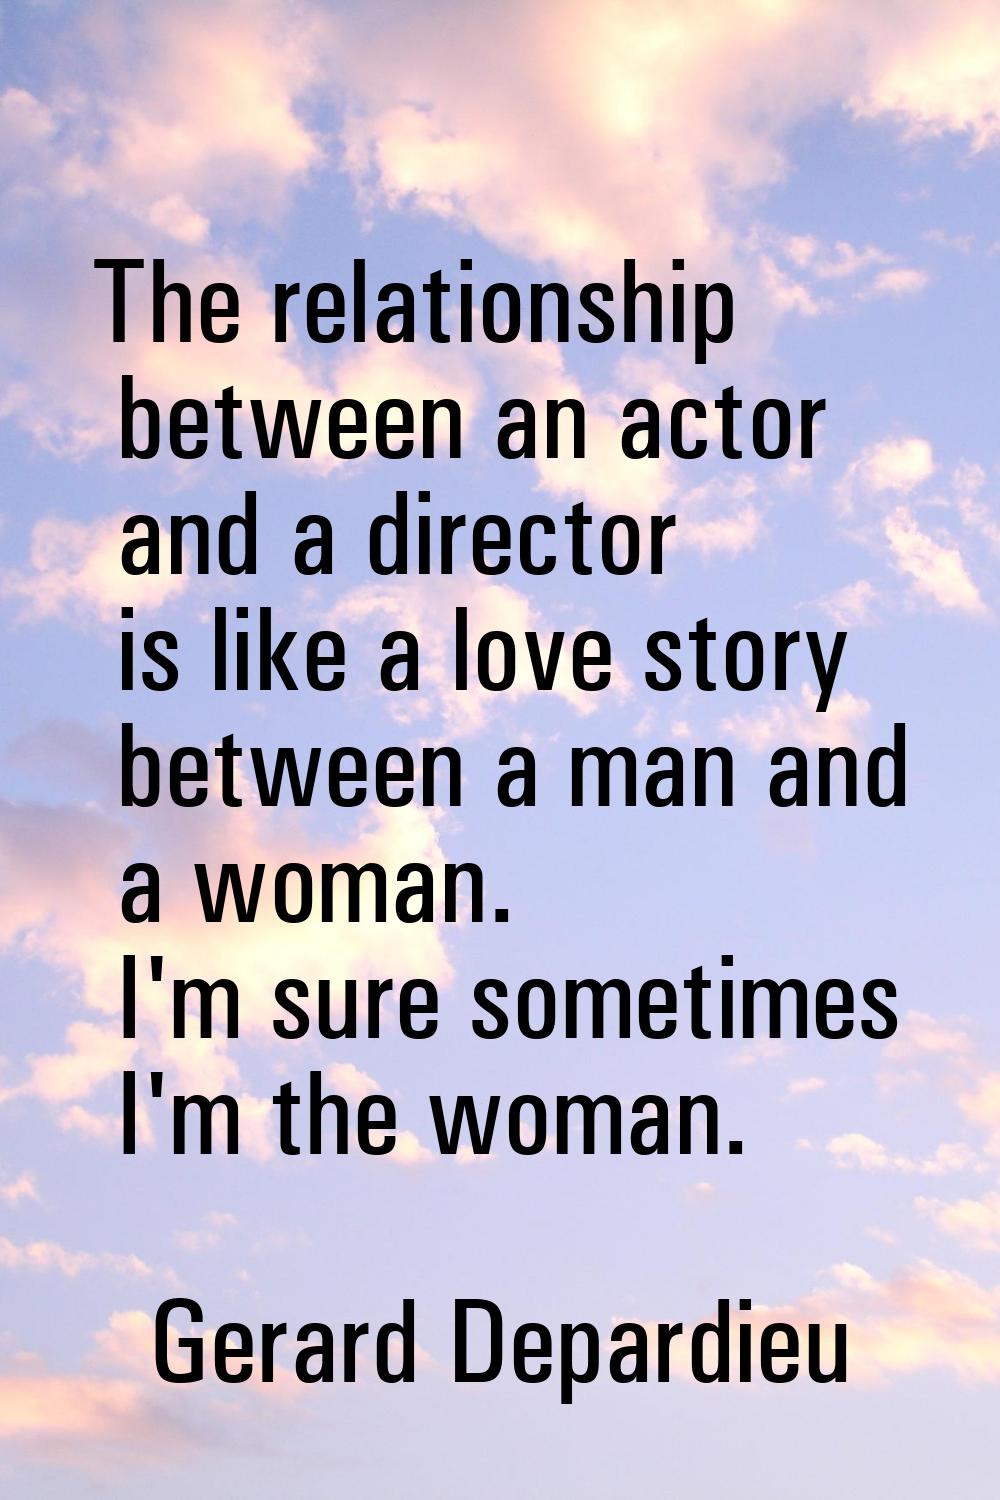 The relationship between an actor and a director is like a love story between a man and a woman. I'